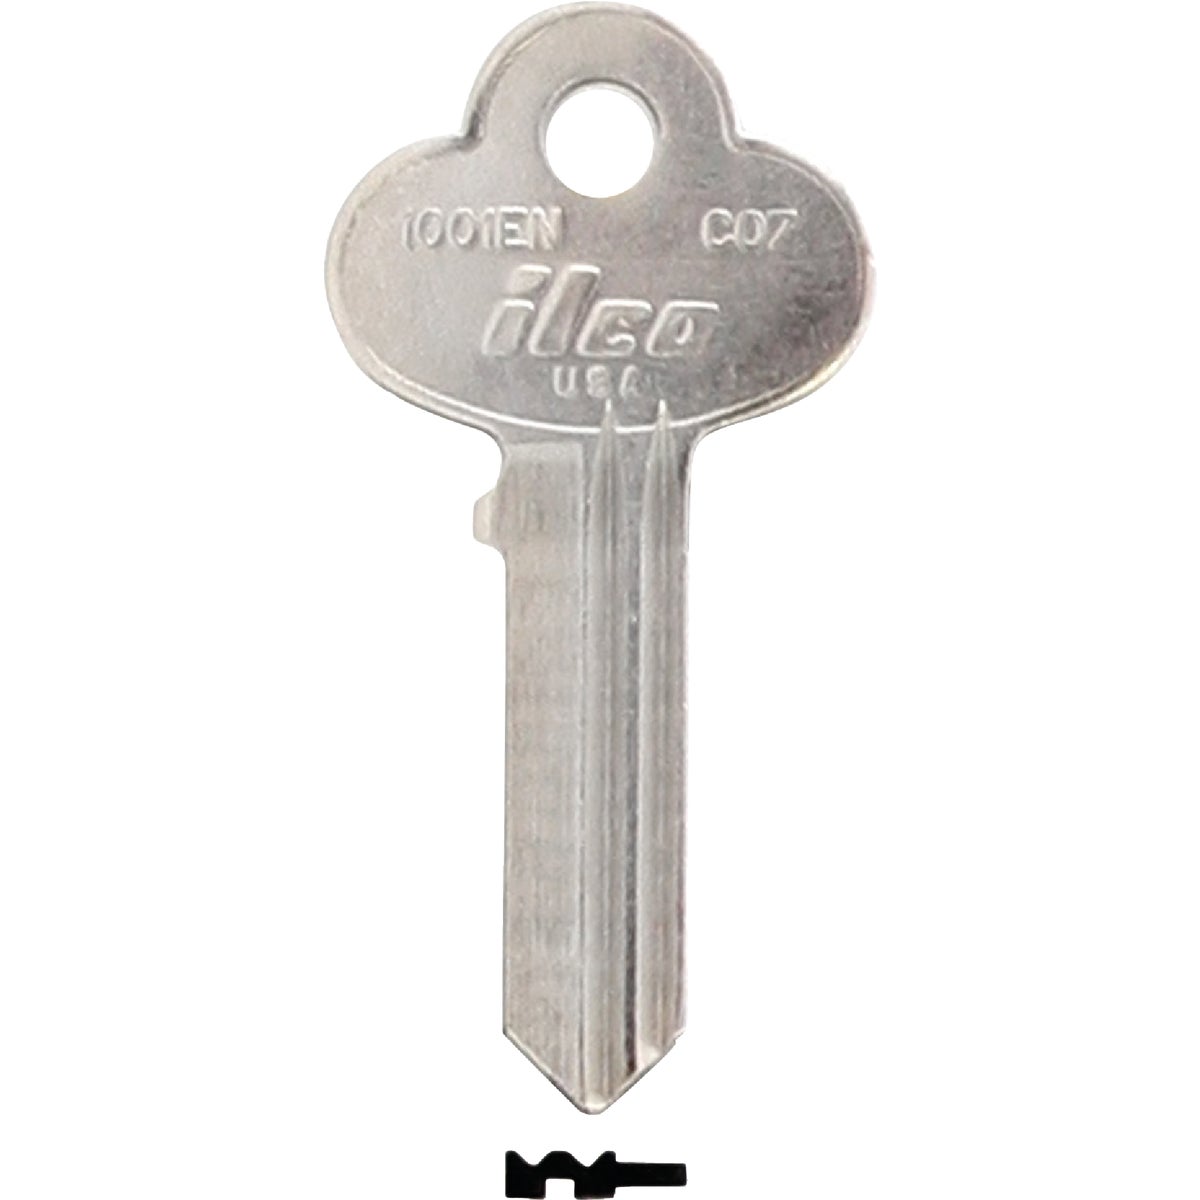 Item 203130, Nickel-plated key blank. When you order one, you will receive 10 keys.